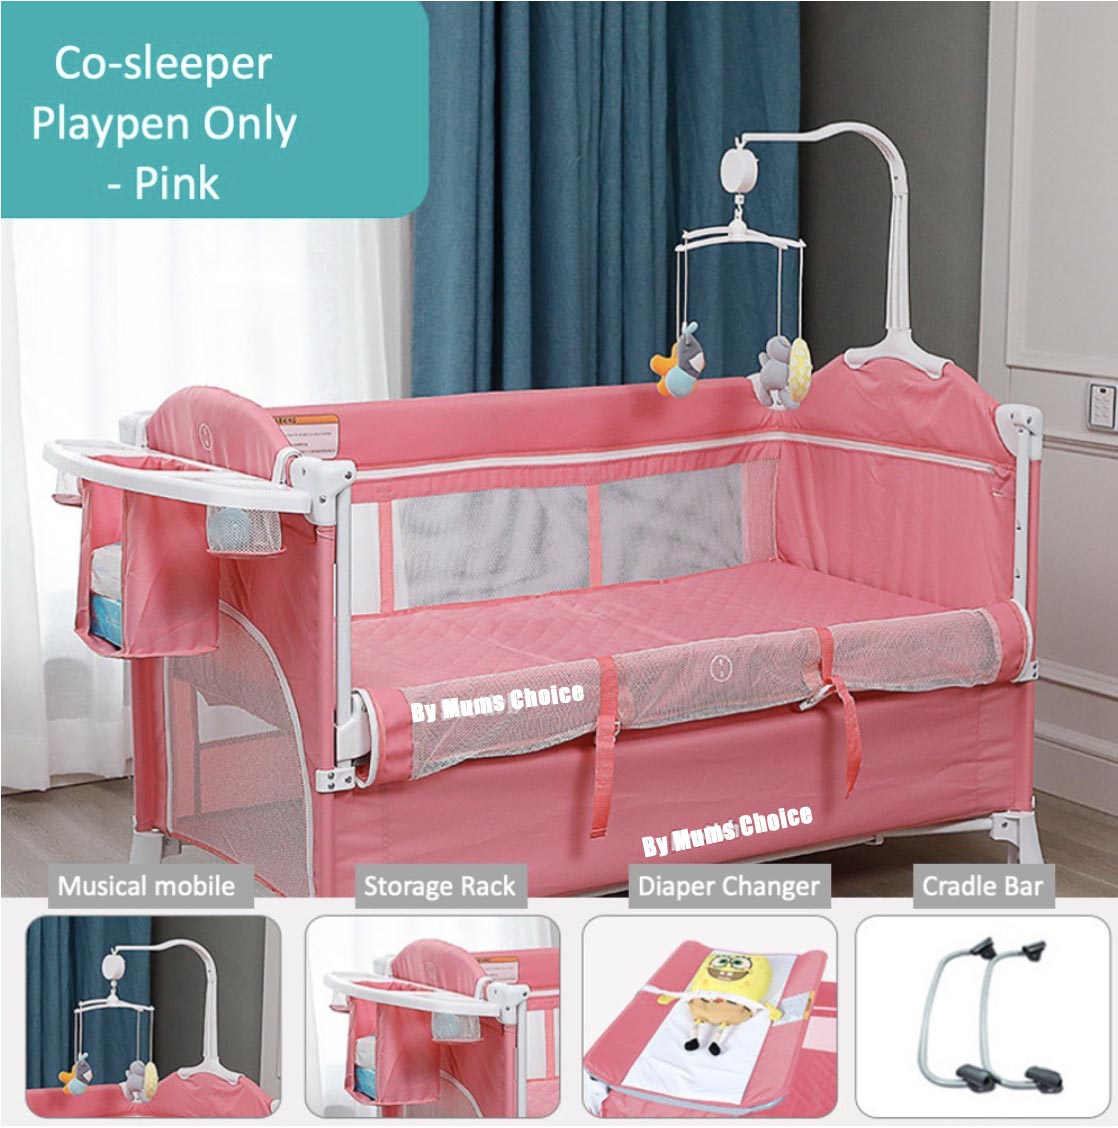 Mums Choice Foldable 2 Layers Playpen with Cradle and Co-Sleeper Function